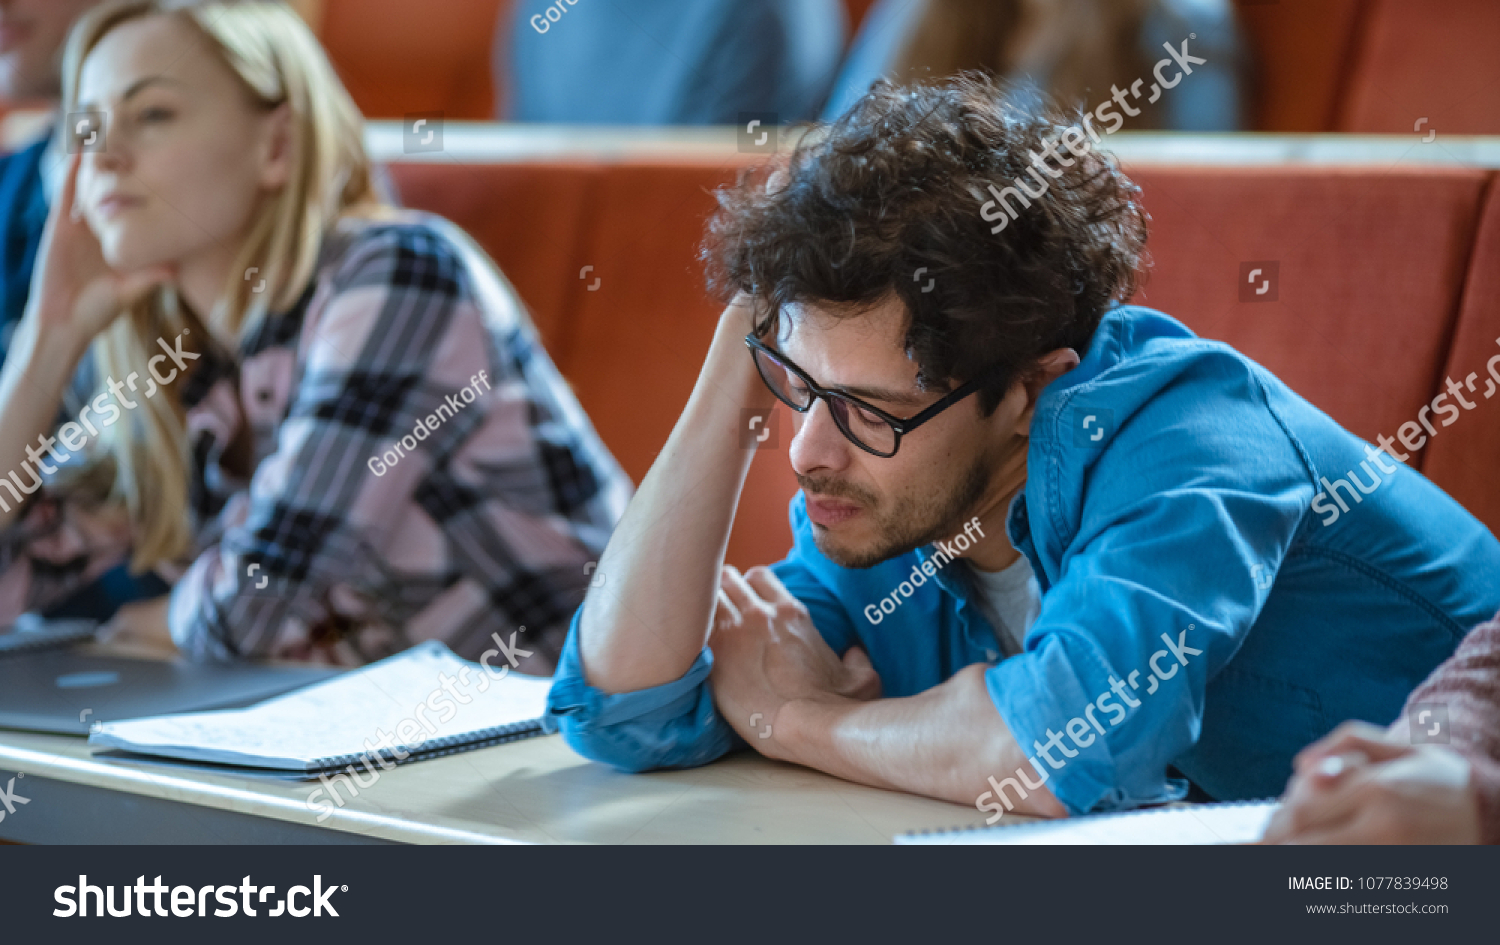 Bored Male Student Listens Lecture at the University. Tired, Exhausted and Overworked Young Male Holds His Head. #1077839498